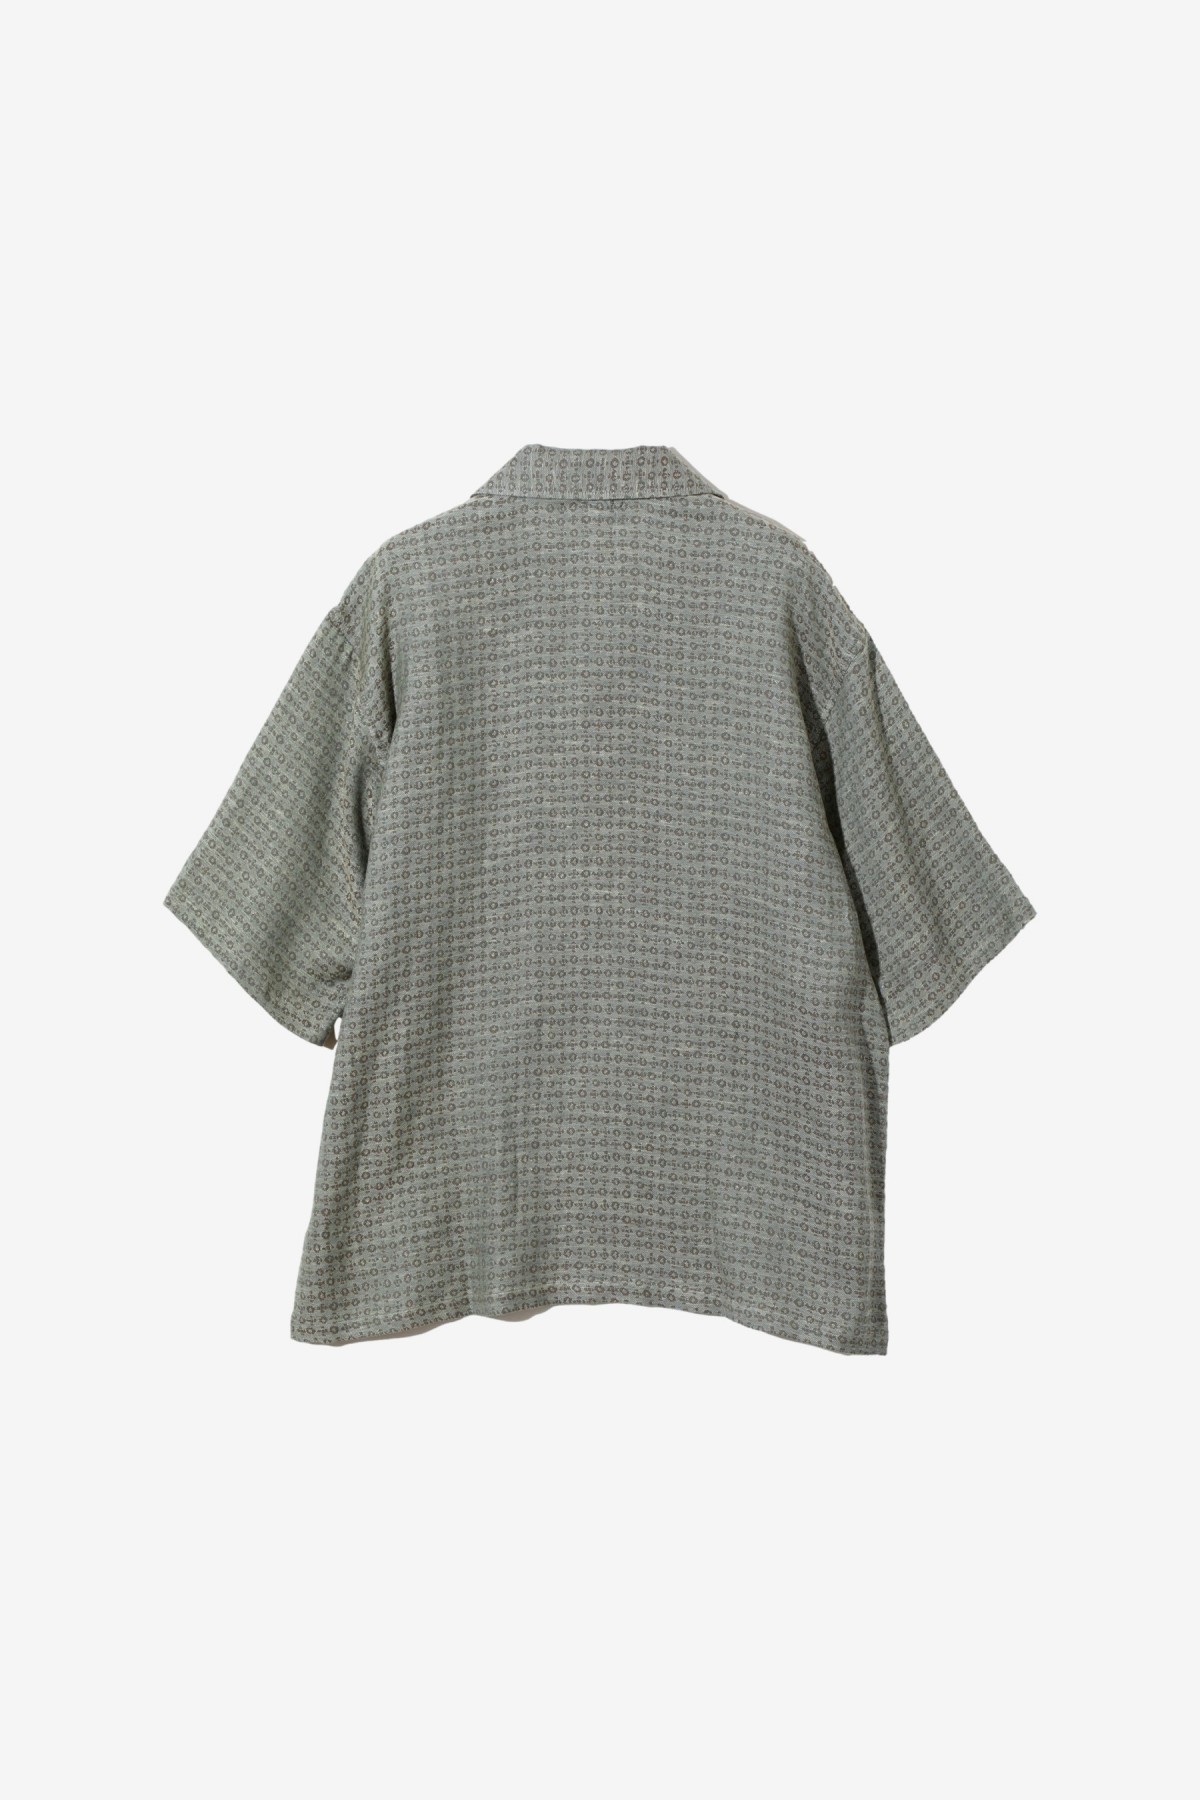 South2 West8 Cabana Shirt in Blue Grey